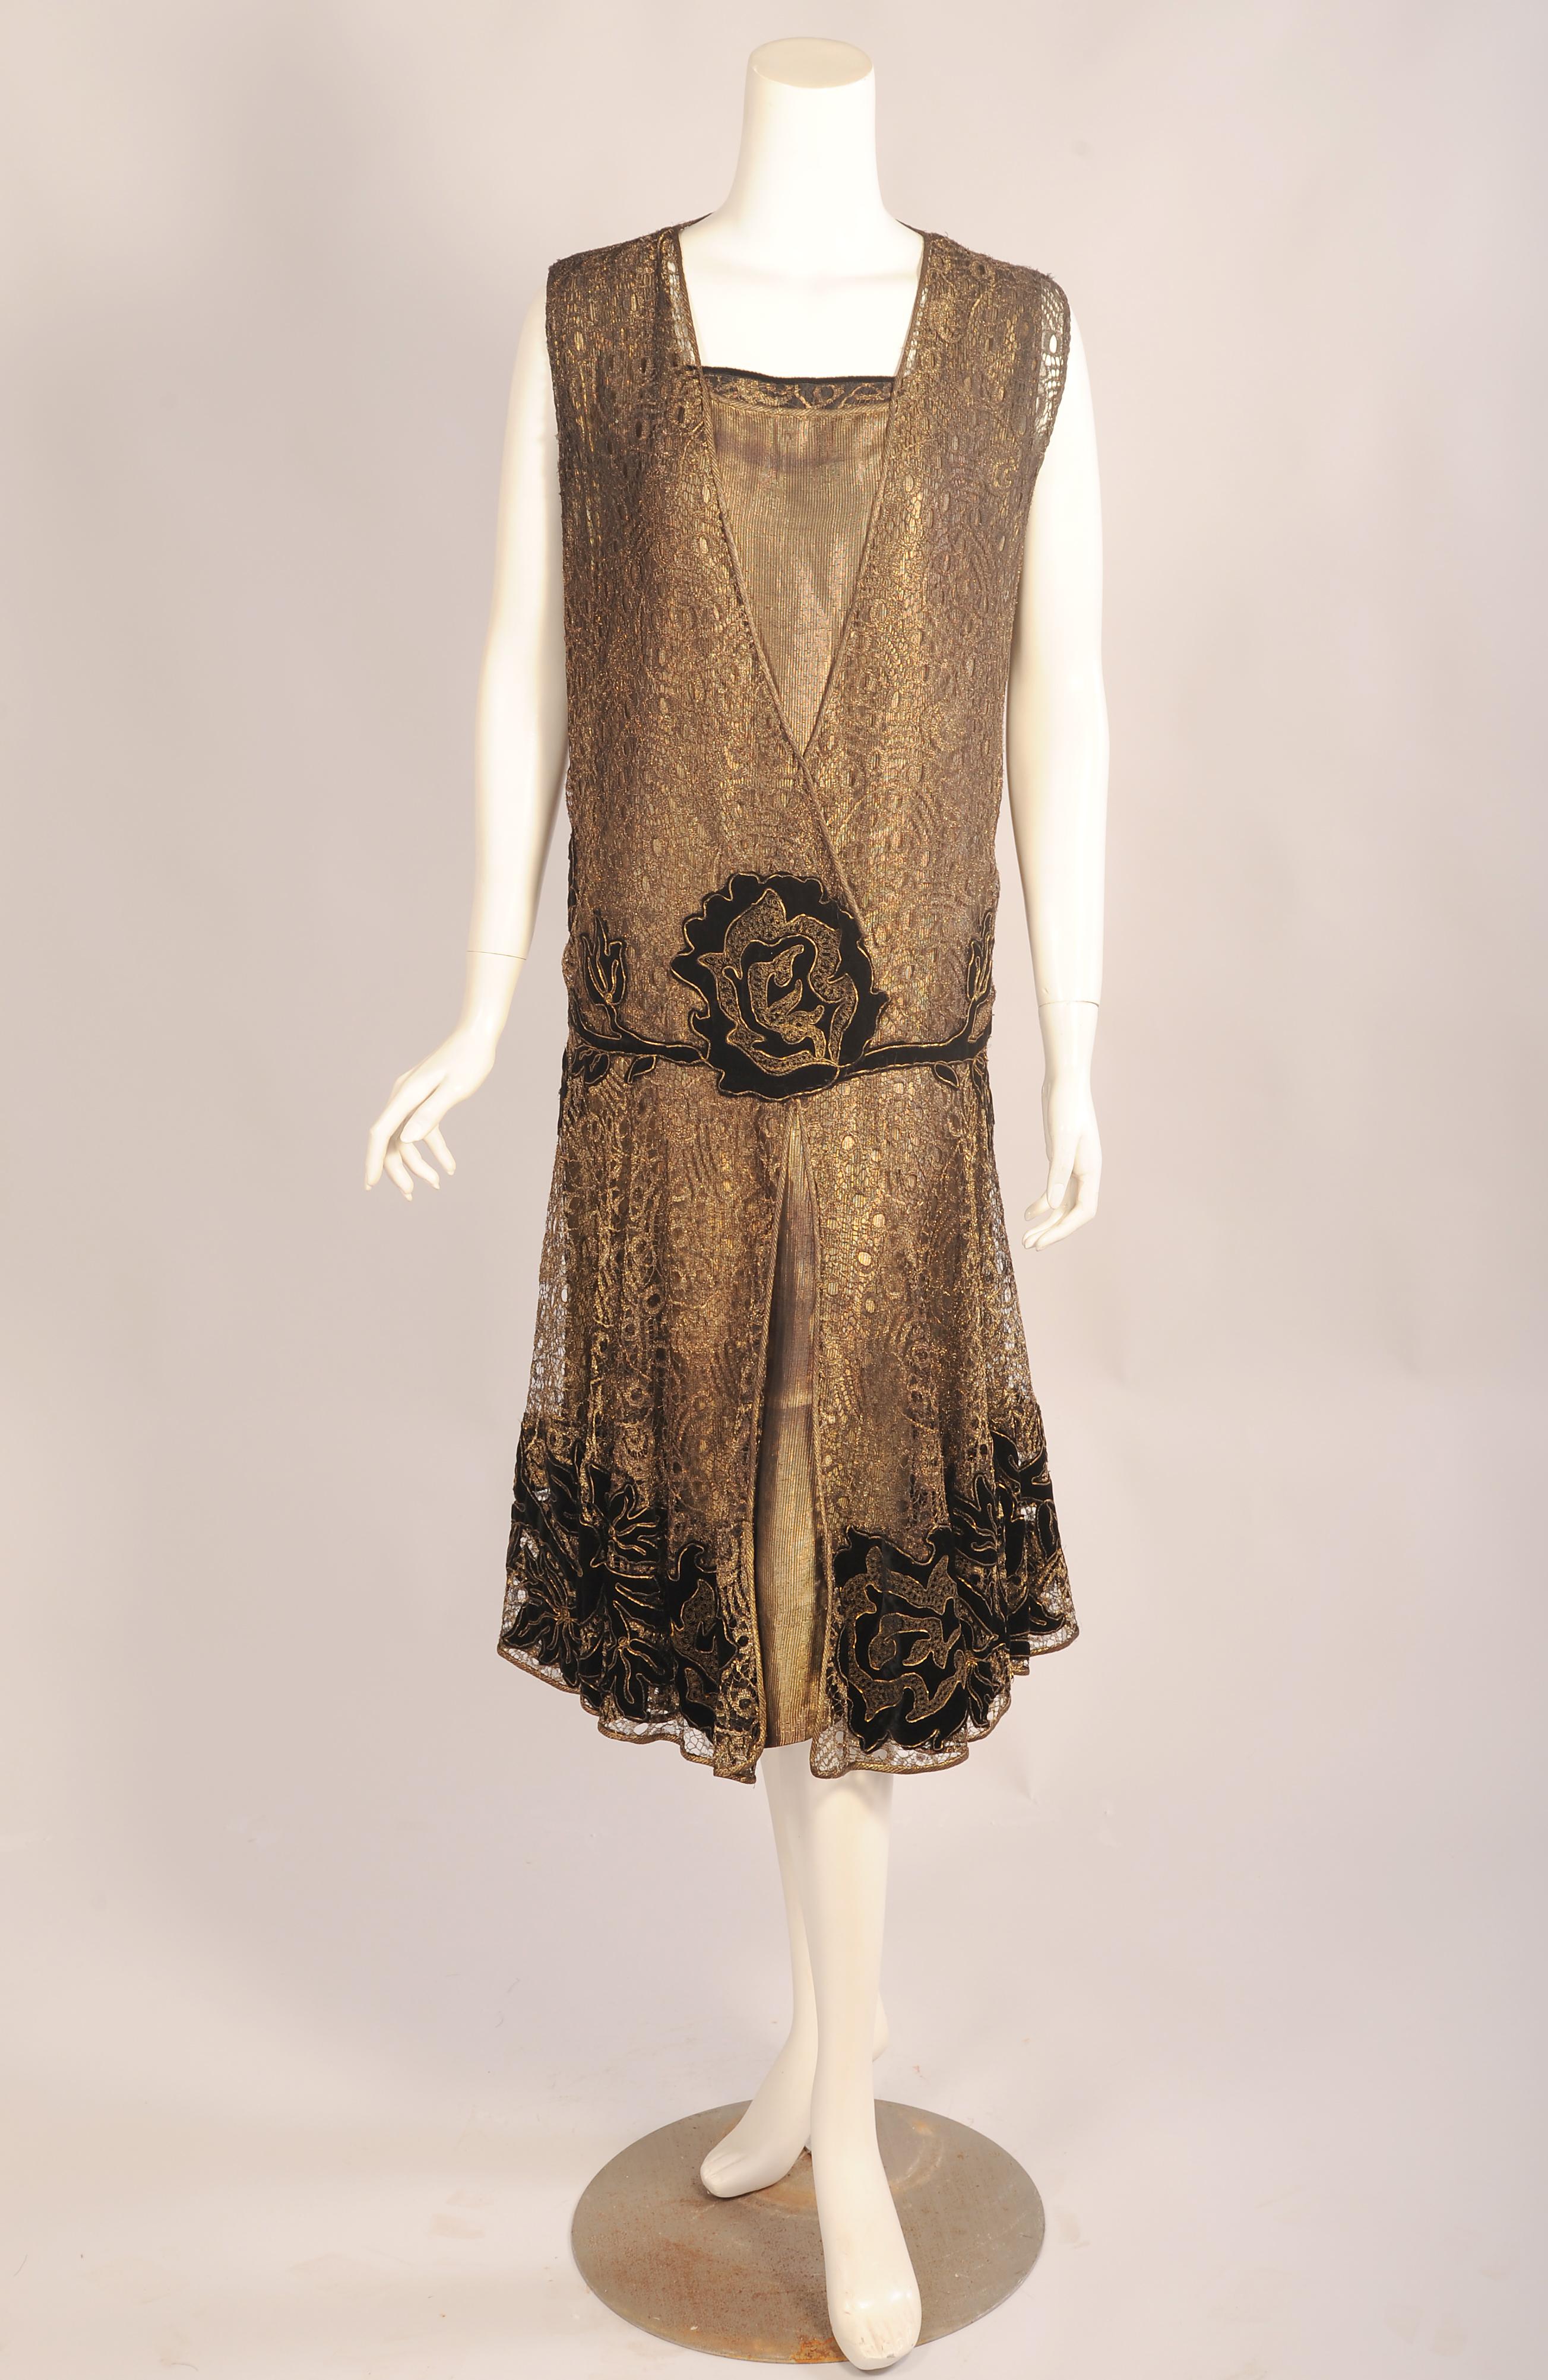 Glistening metallic gold lace is layered over a gold lame slip for this dress by Braeburn, Paris and New York. The sleeveless dress has a wrap style bodice above the dropped waist which is appliqued with black velvet blossoms outlined with gold